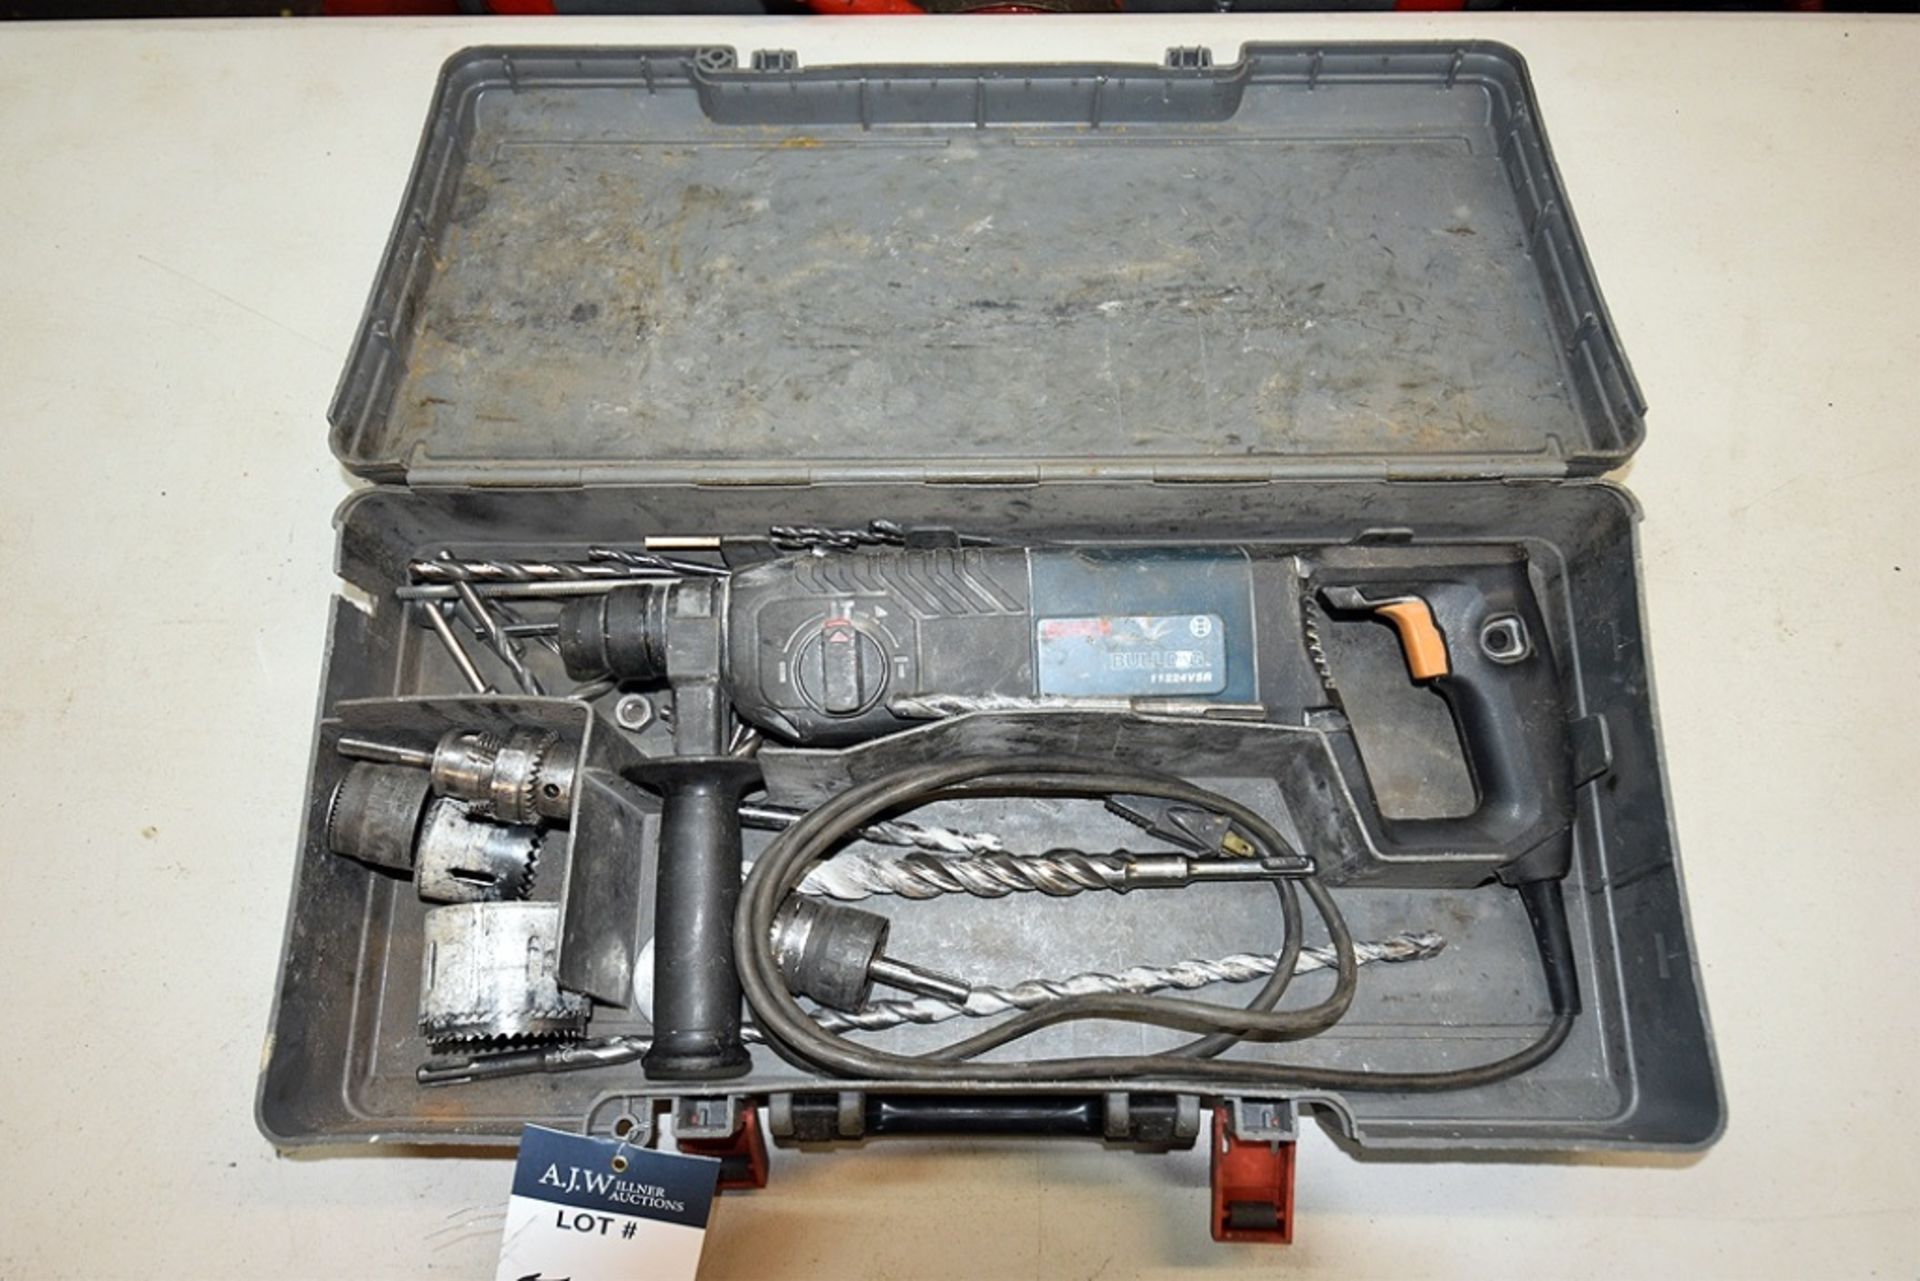 Bosch Bulldog Model 11224VSM 7/8" SDS + Corded Rotary Hammer w/ Case and Bits - Image 2 of 4